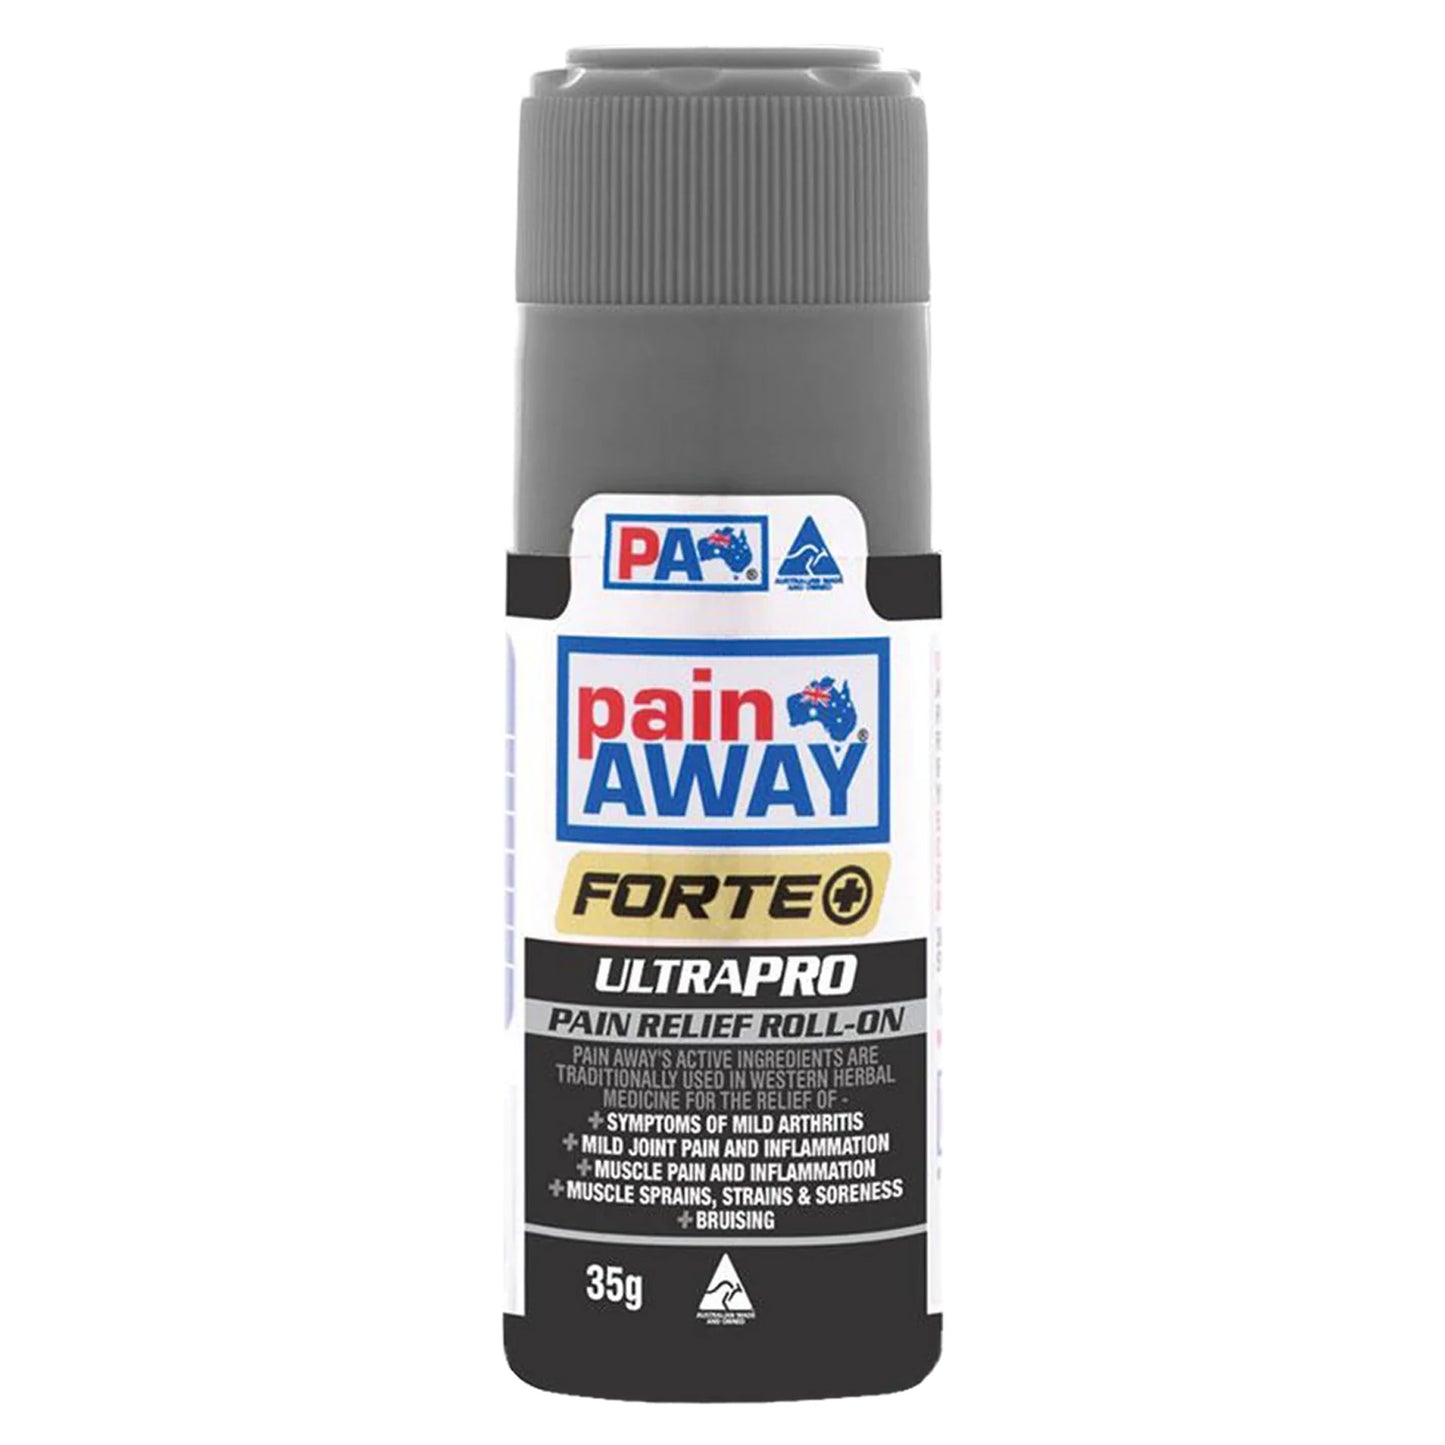 PAIN AWAY FORTE+ ULTRA PRO ROLL ON 35G